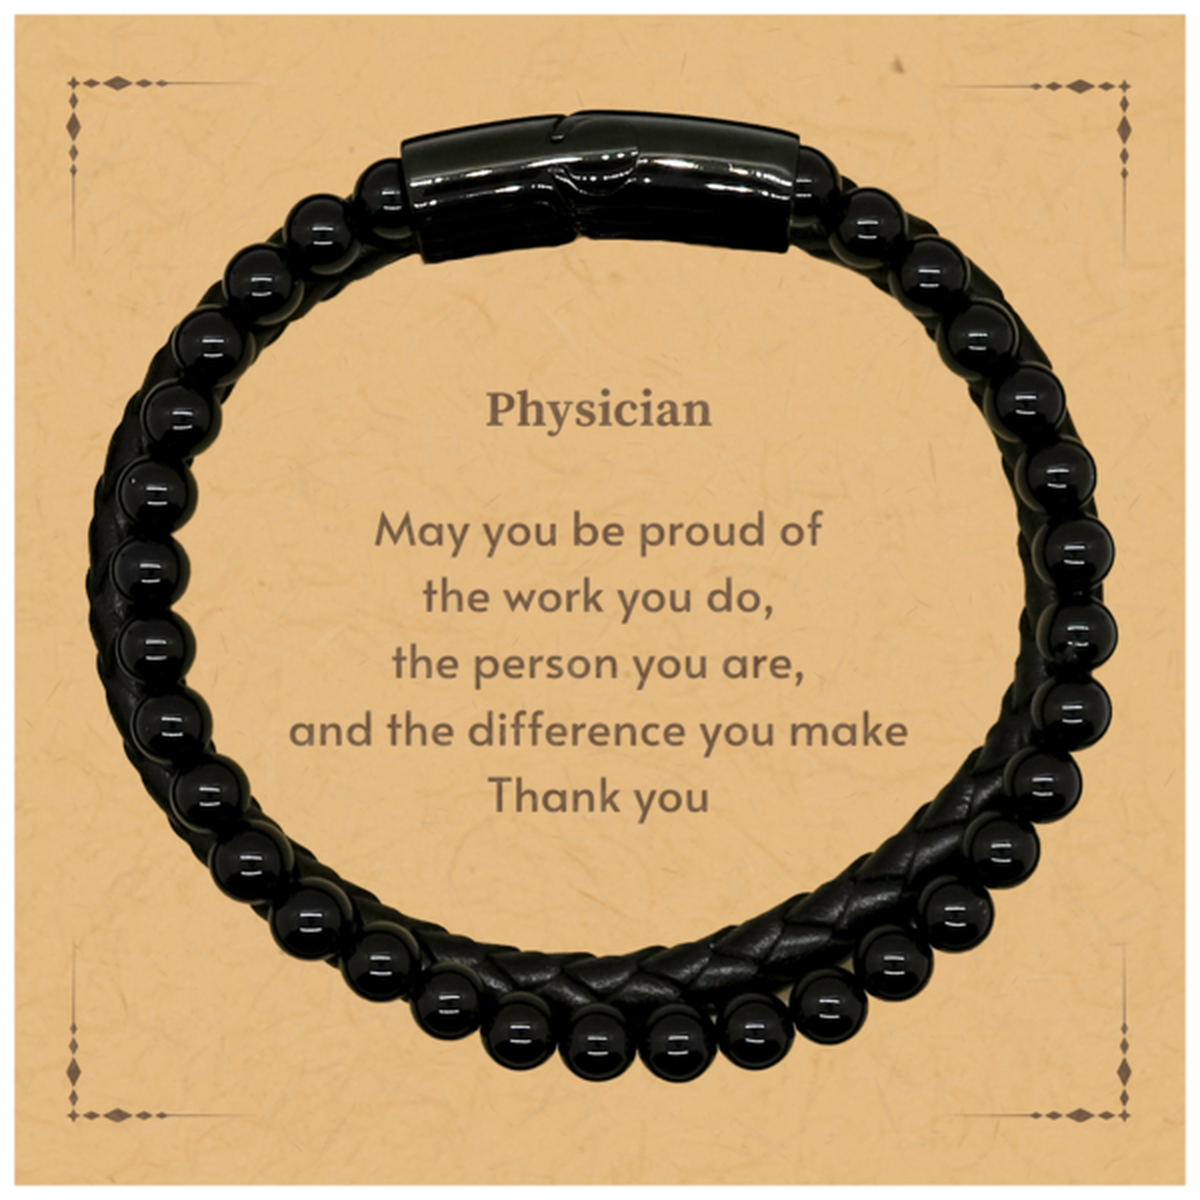 Heartwarming Stone Leather Bracelets Retirement Coworkers Gifts for Physician, Physician May You be proud of the work you do, the person you are Gifts for Boss Men Women Friends